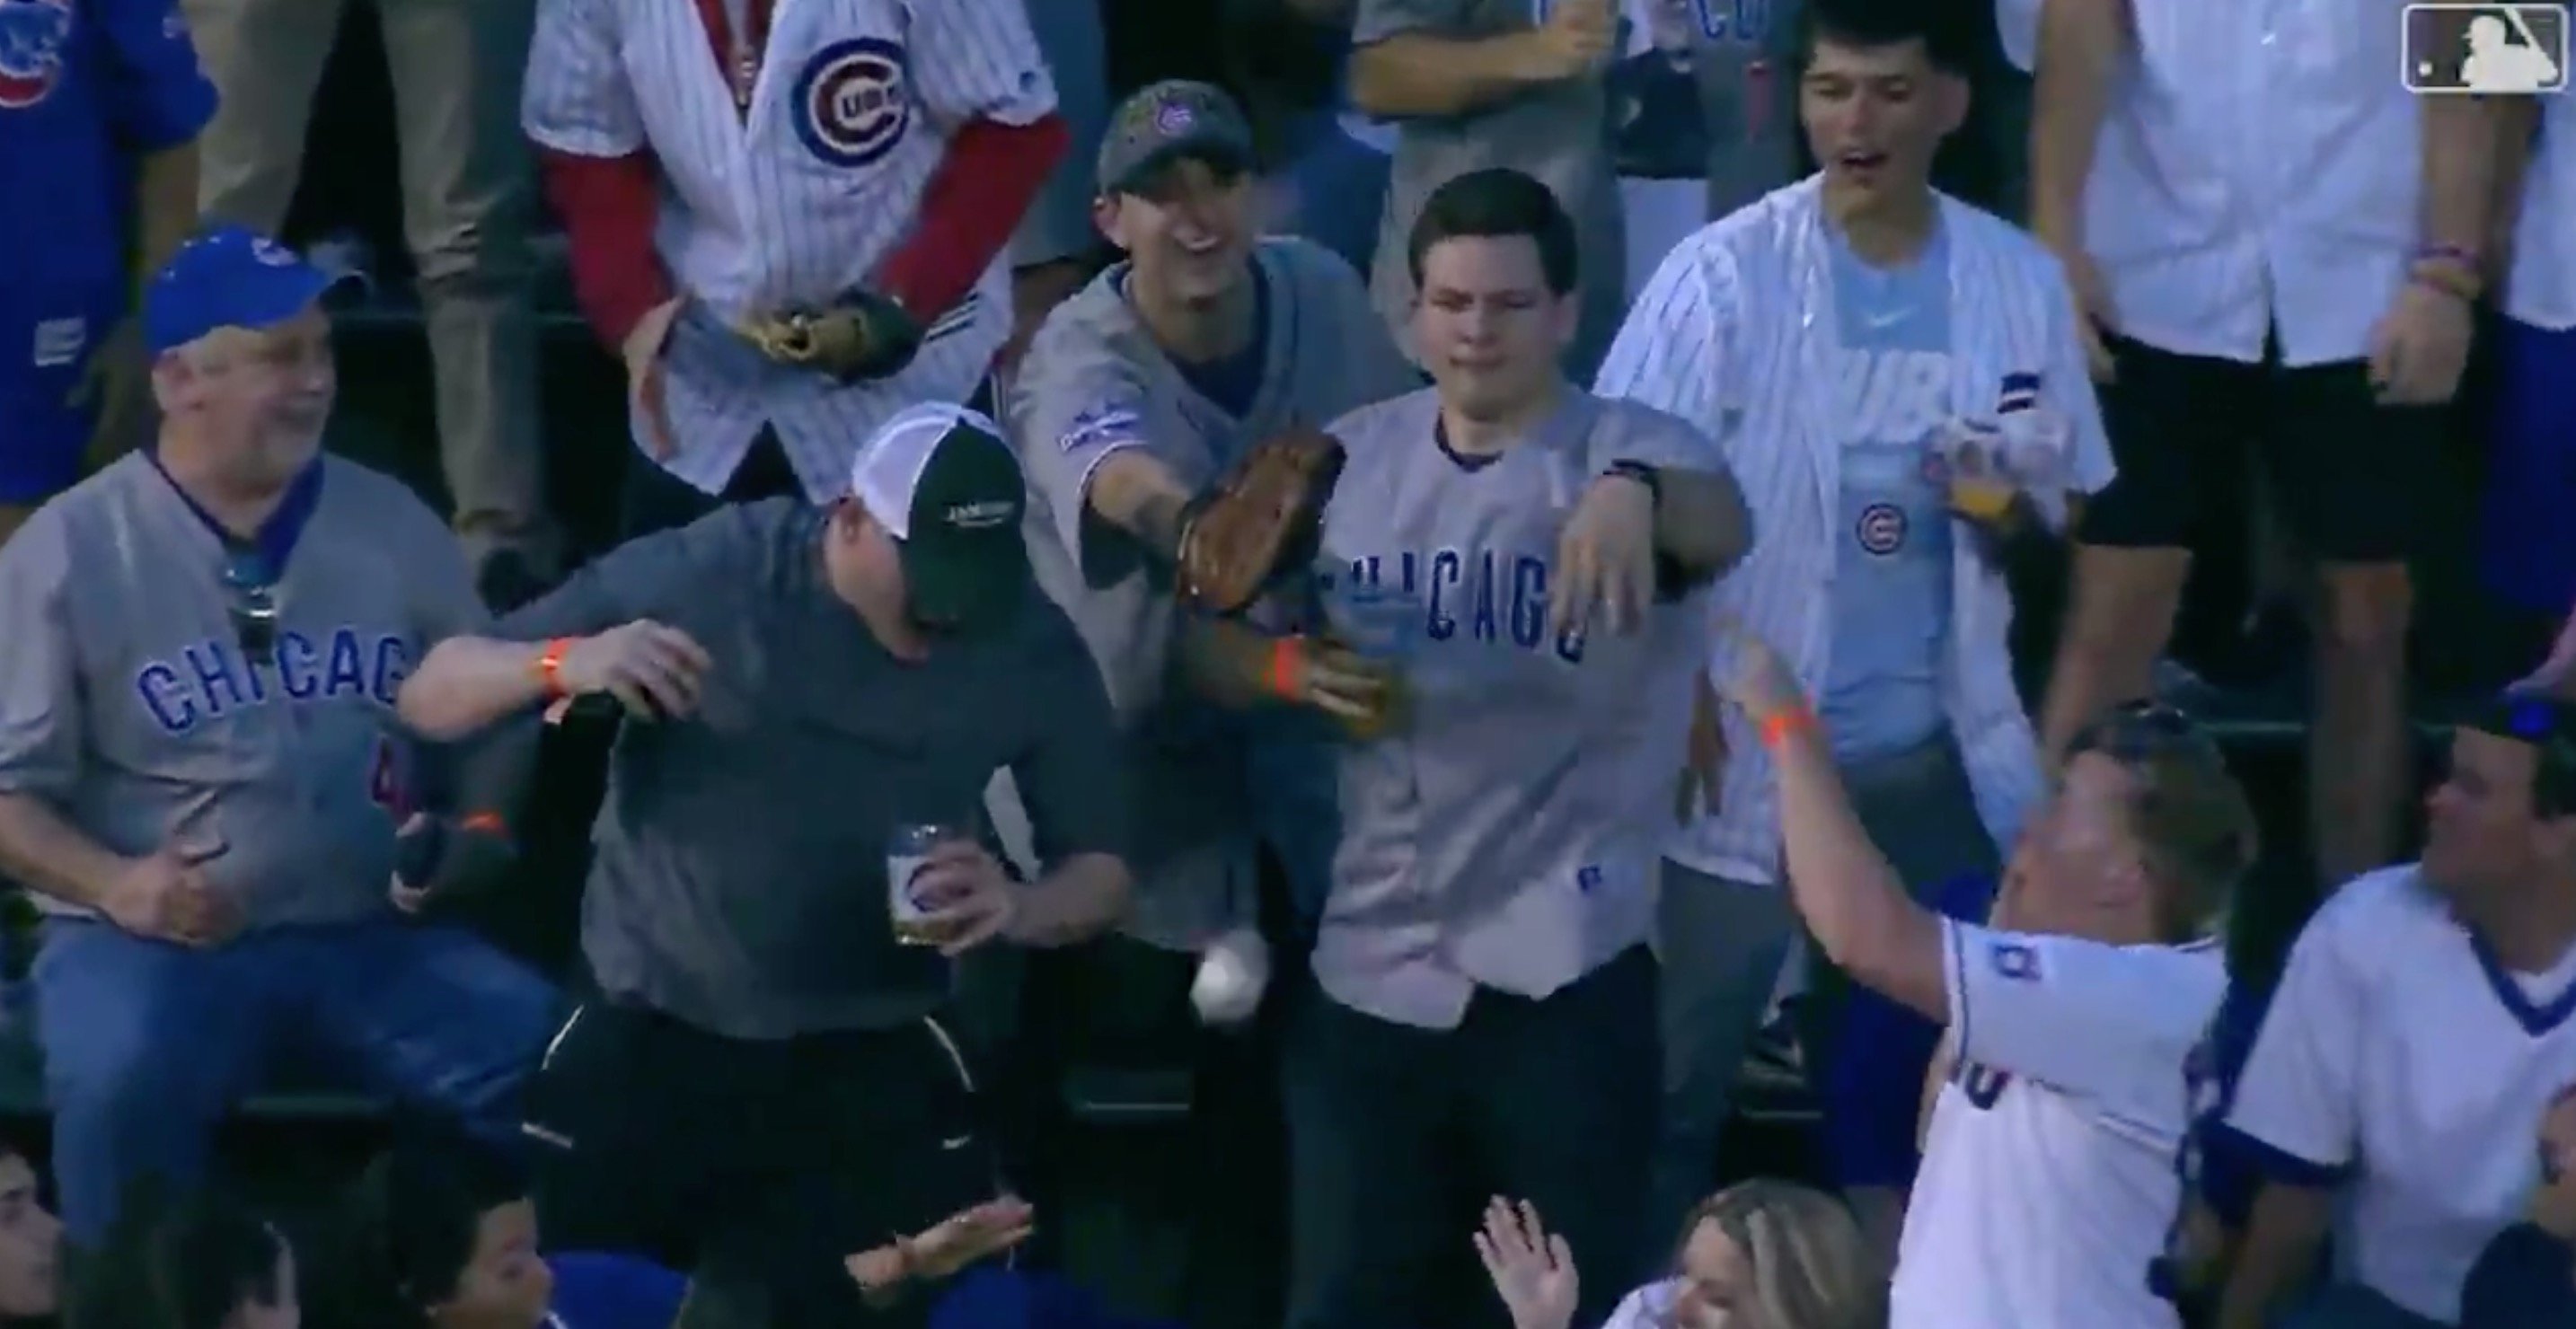 This passionate Cubs fan had no desire to keep a baseball thrown into the stands by an opposing player.